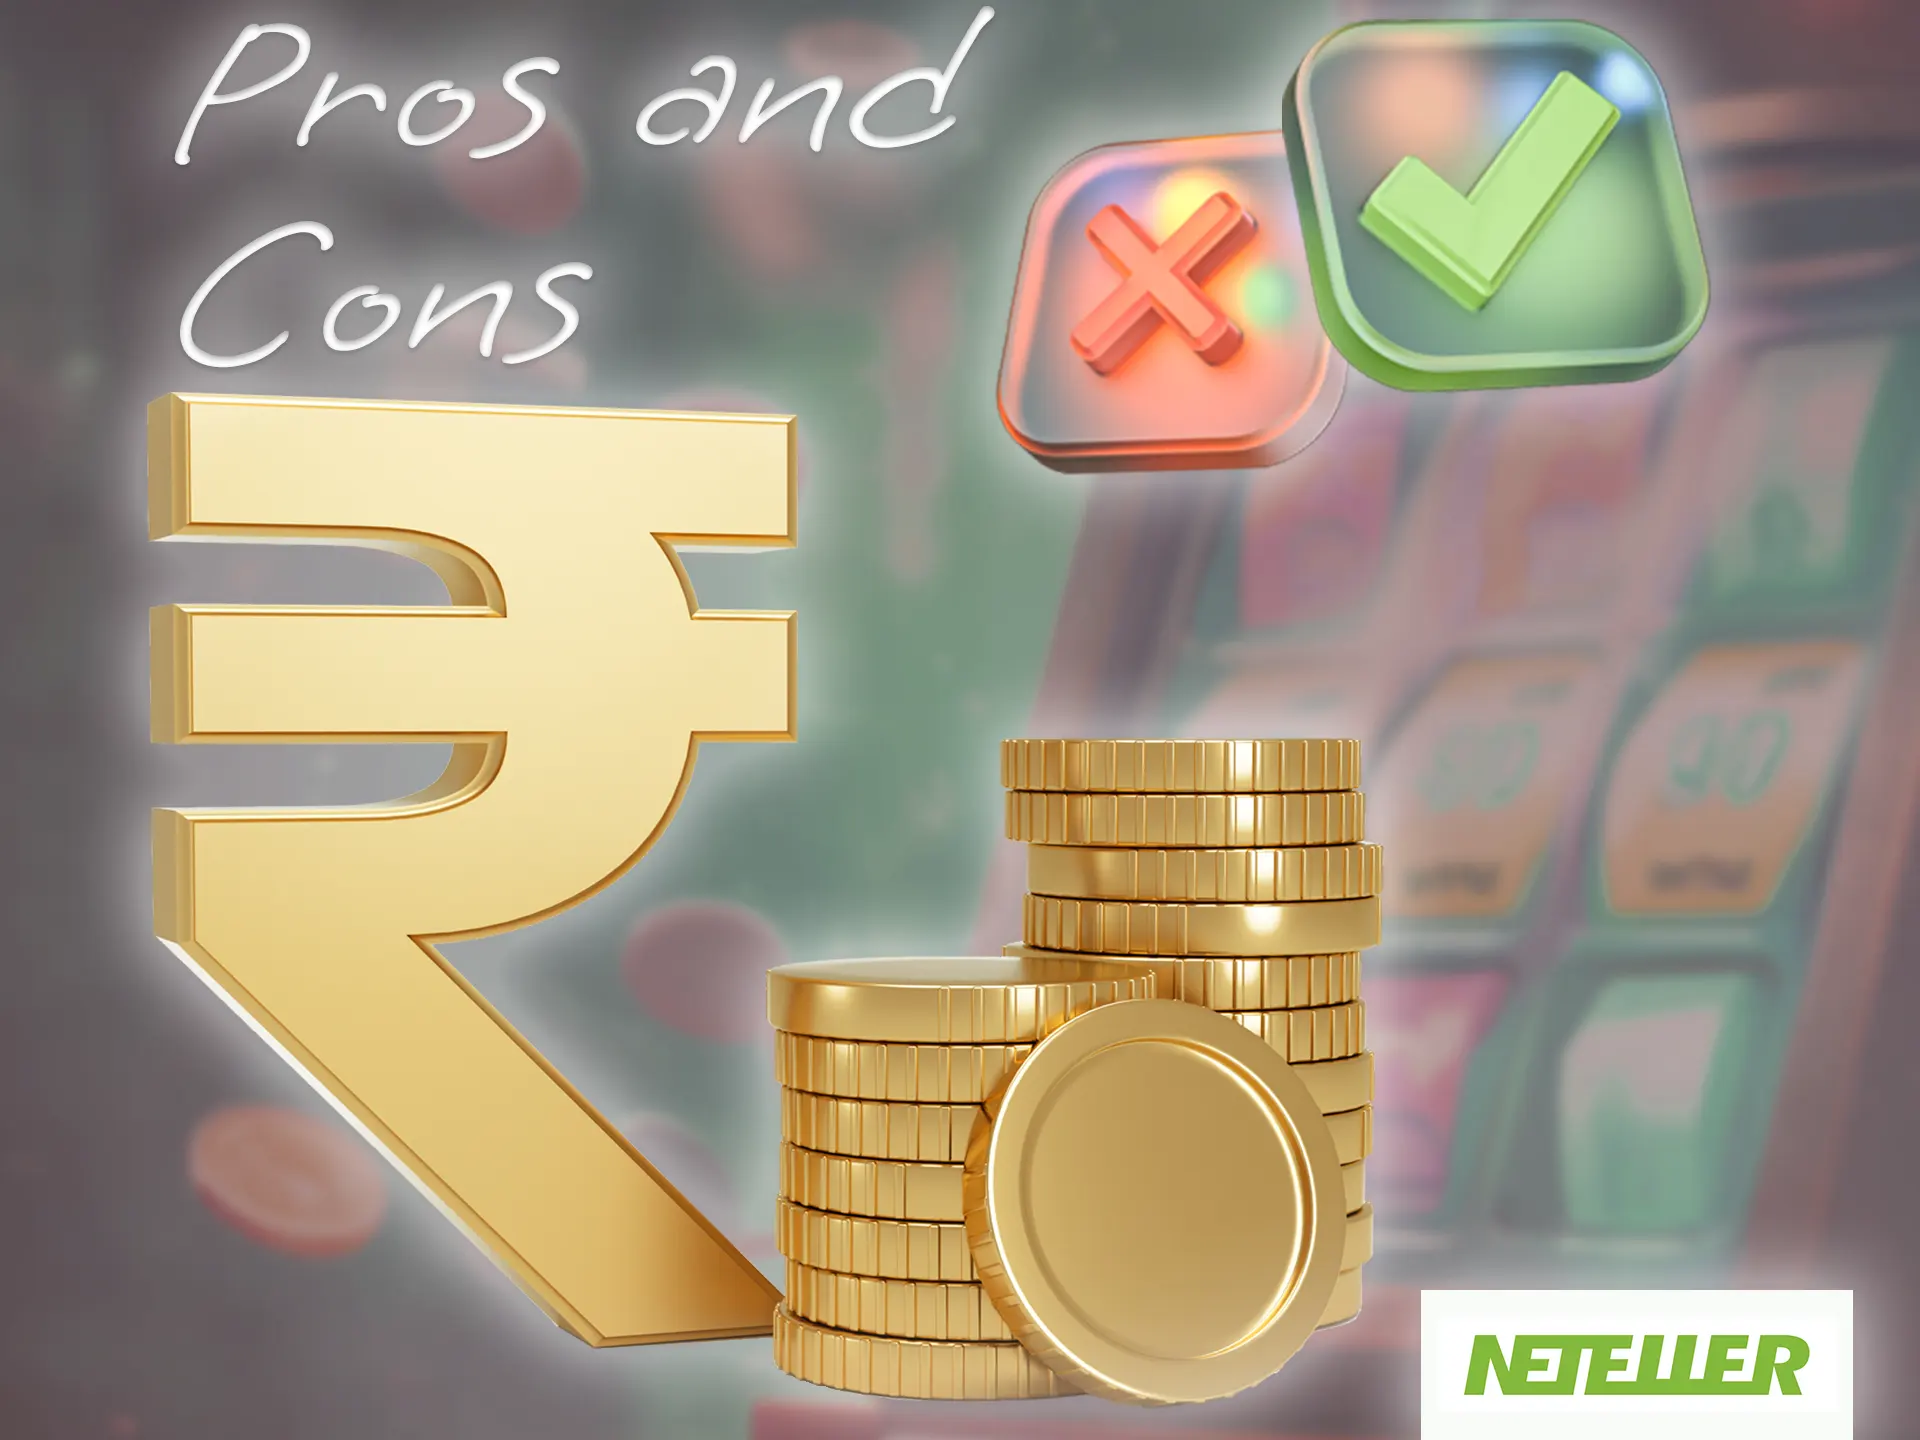 Familiarise yourself with the main pros and cons of Neteller.